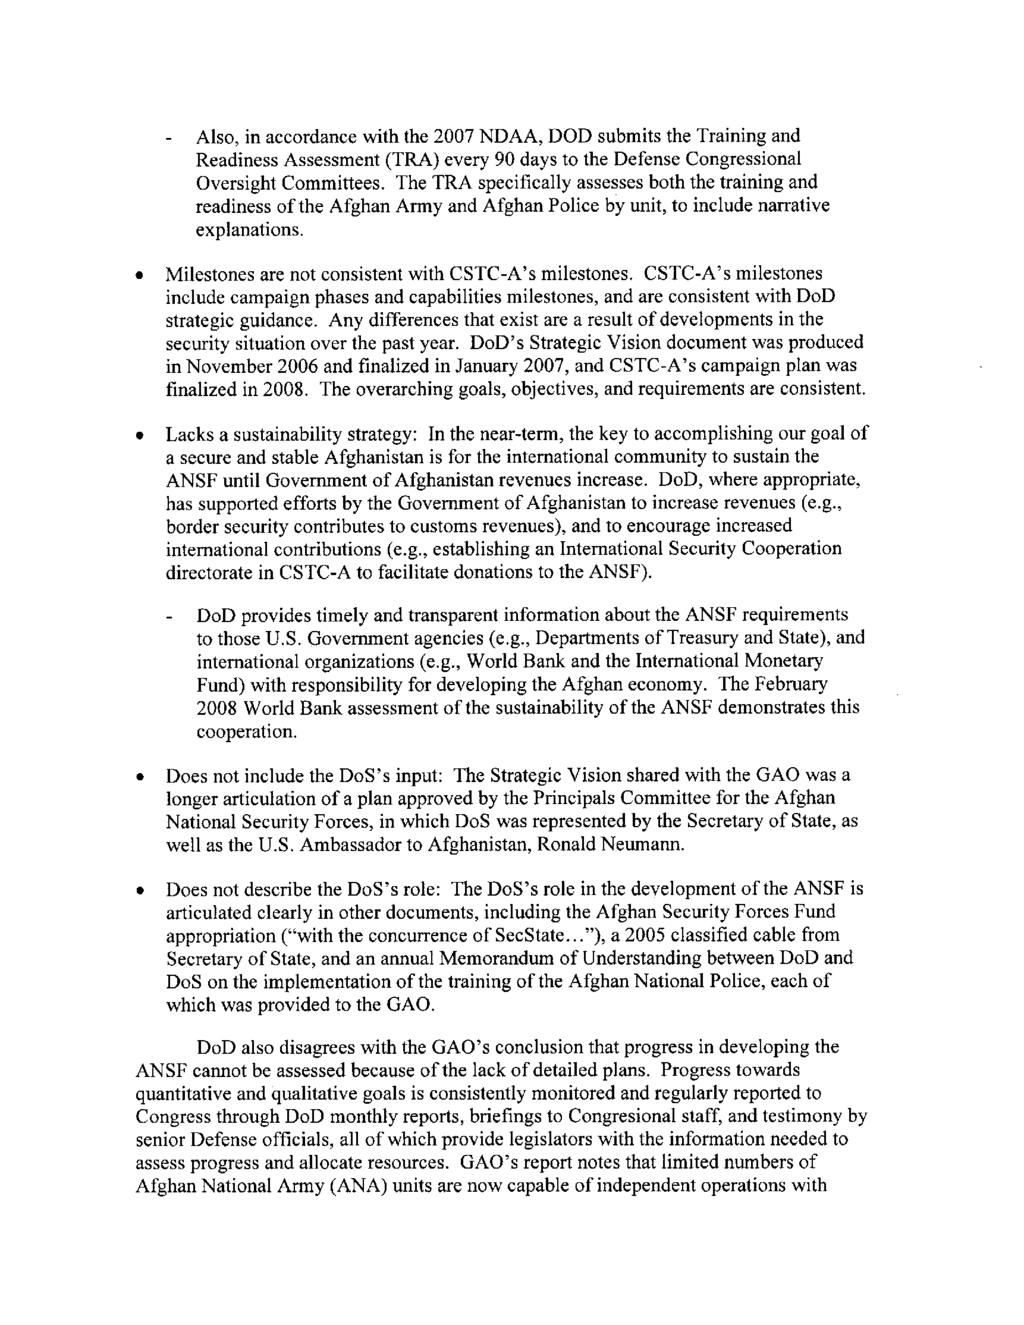 Appendix IV: Comments from the Department of Defense See comment 2.